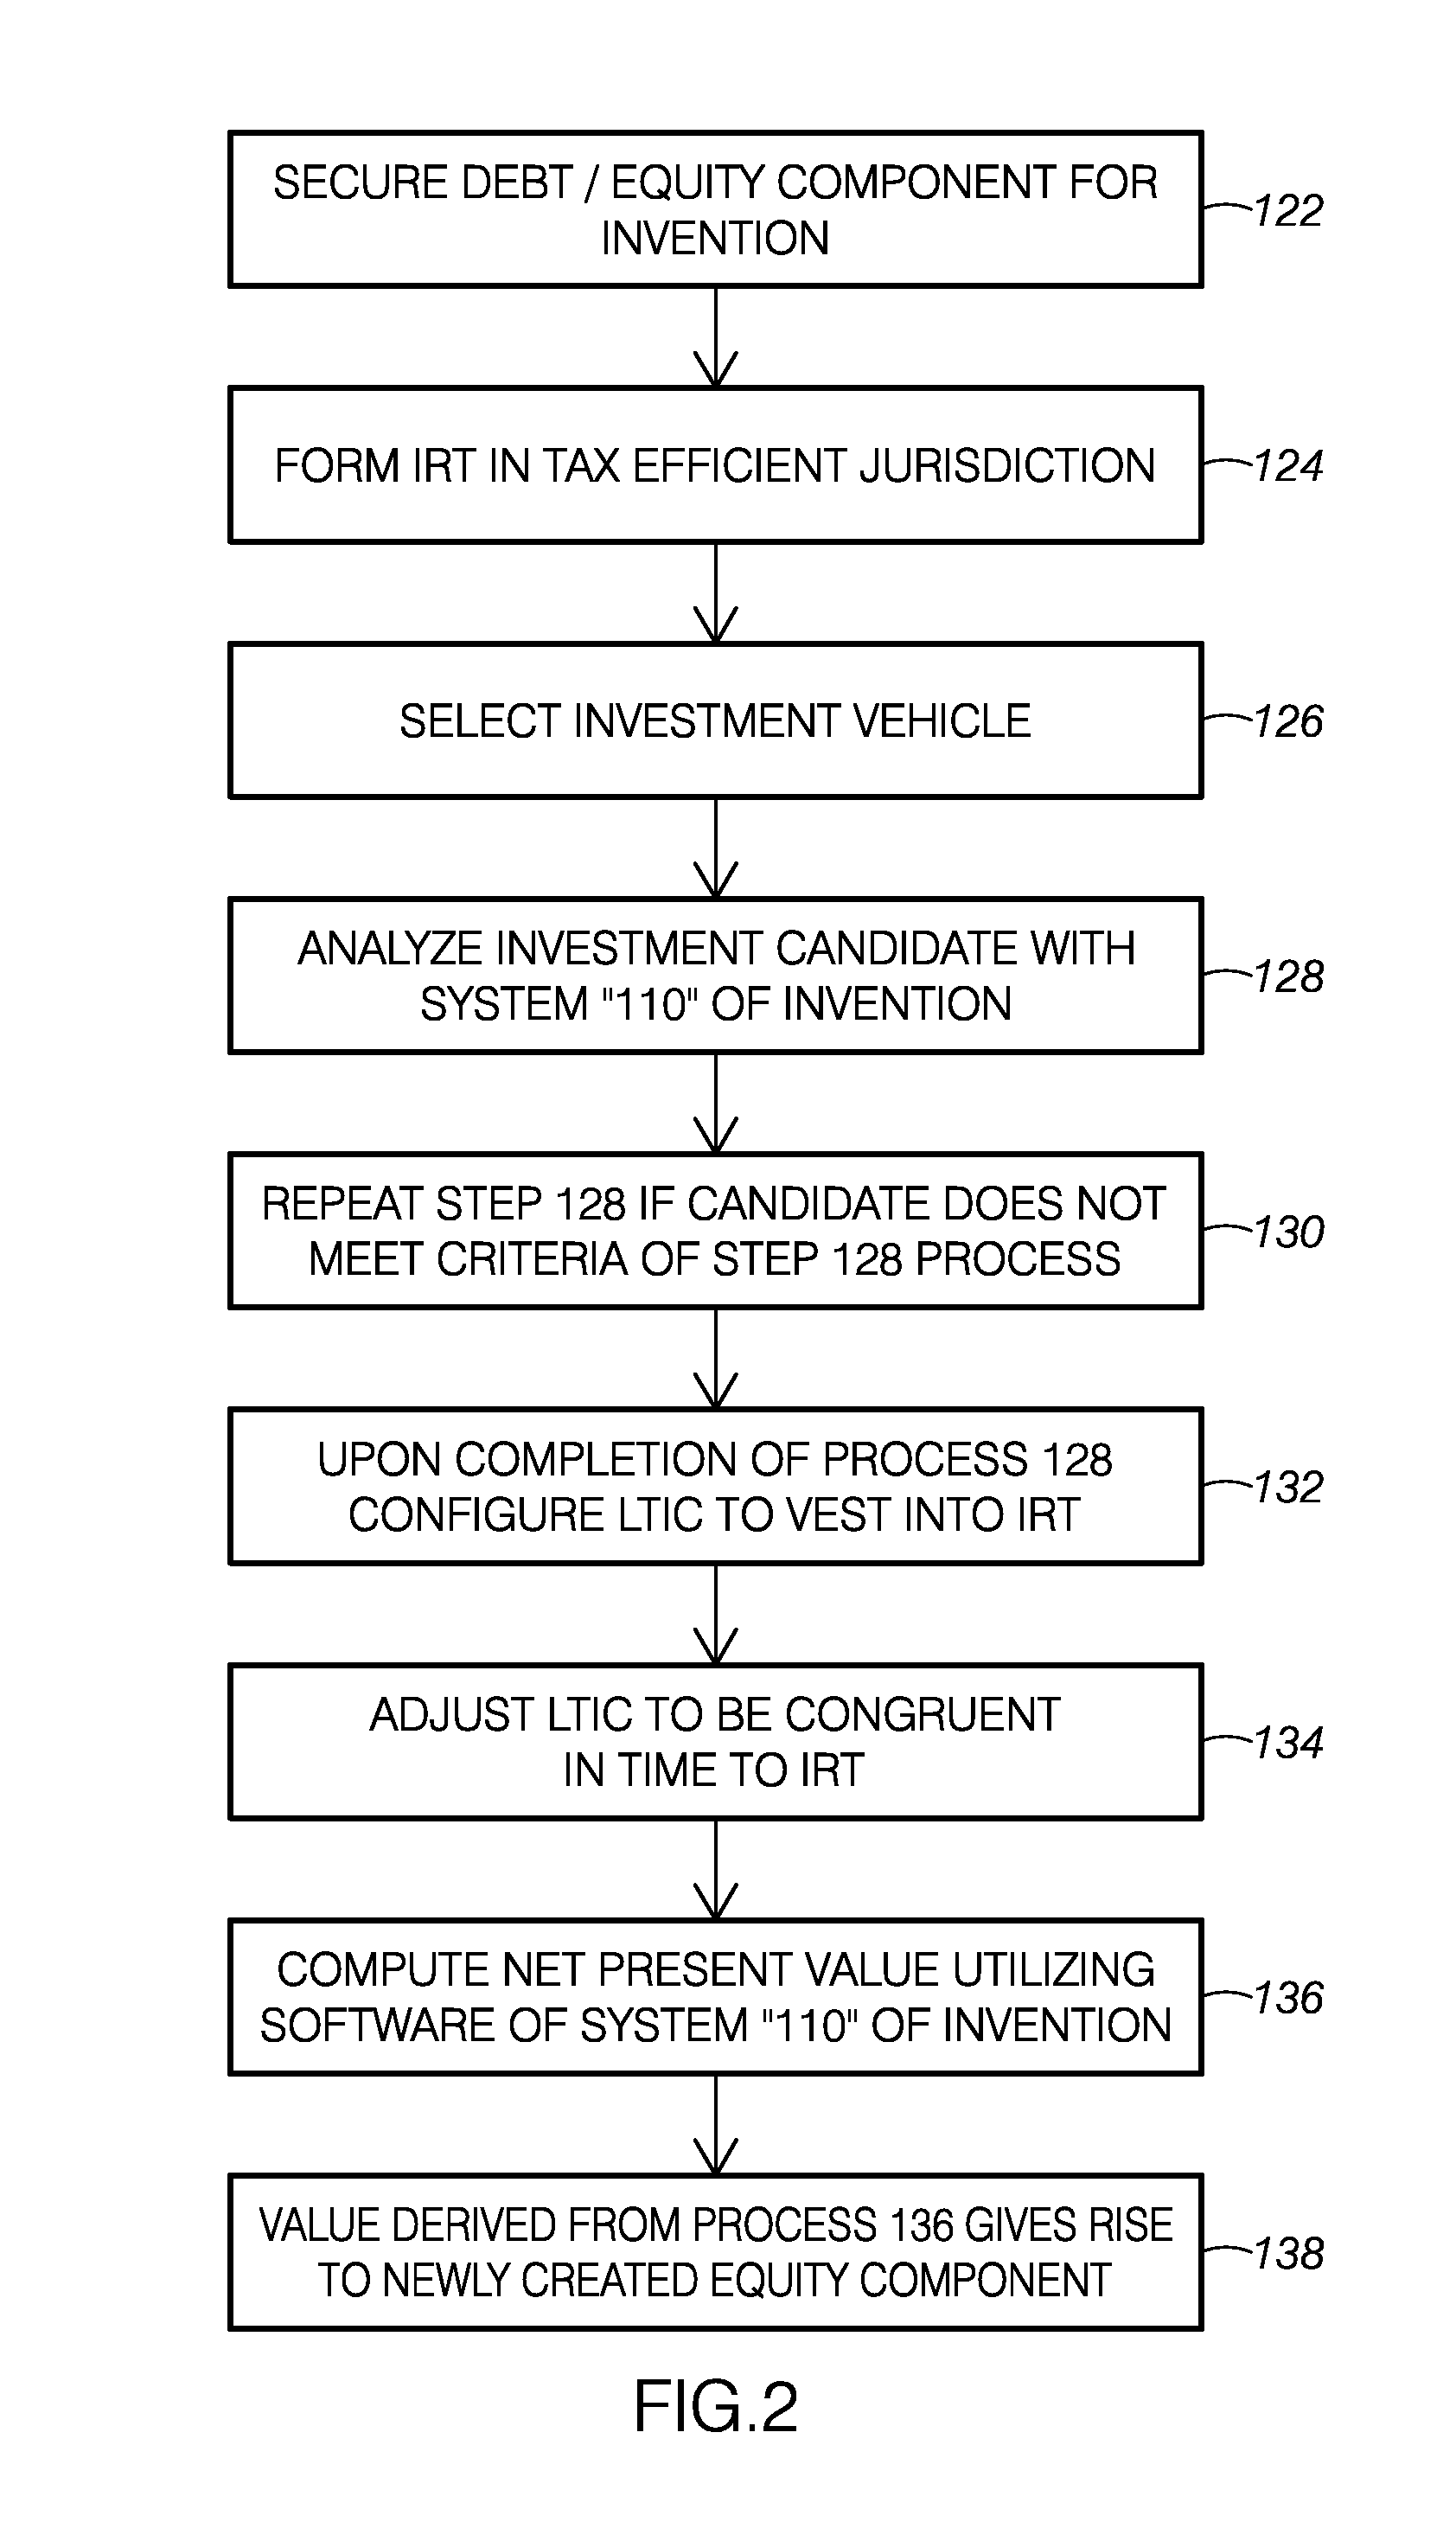 Method and apparatus using debt or equity for making financial transactions economic